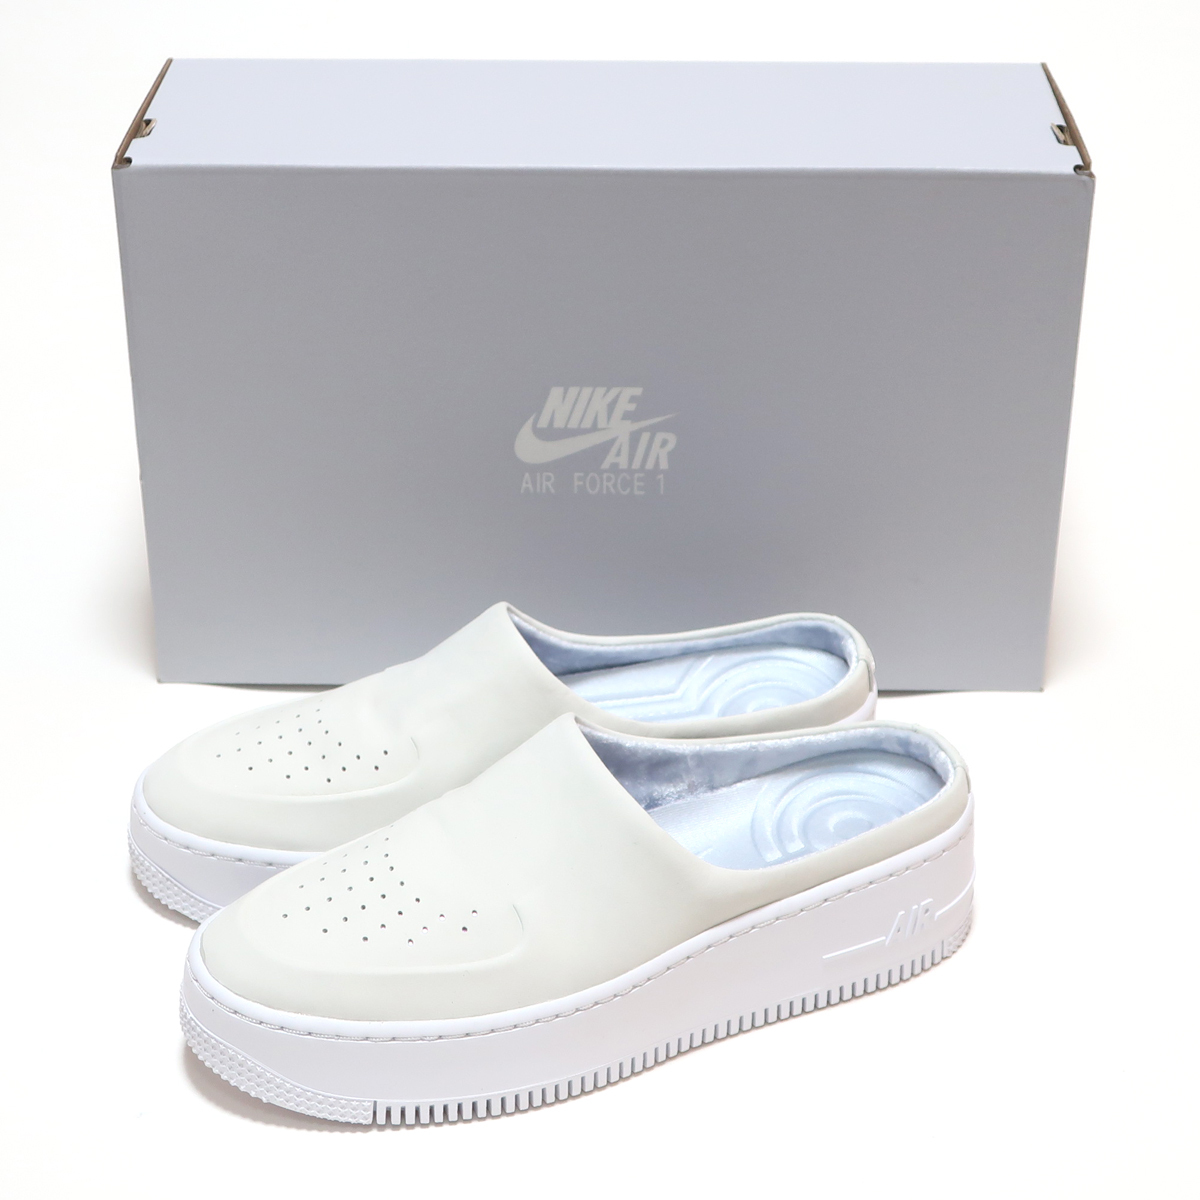 NIKE WMNS AF1 LOVER XX WMNS 24.5cm OFF WHITE/LIGHT SILVER AIR FORCE 1 ( ナイキ ウィメンズ エアフォース1 ラヴァ― オフホワイト )_画像1